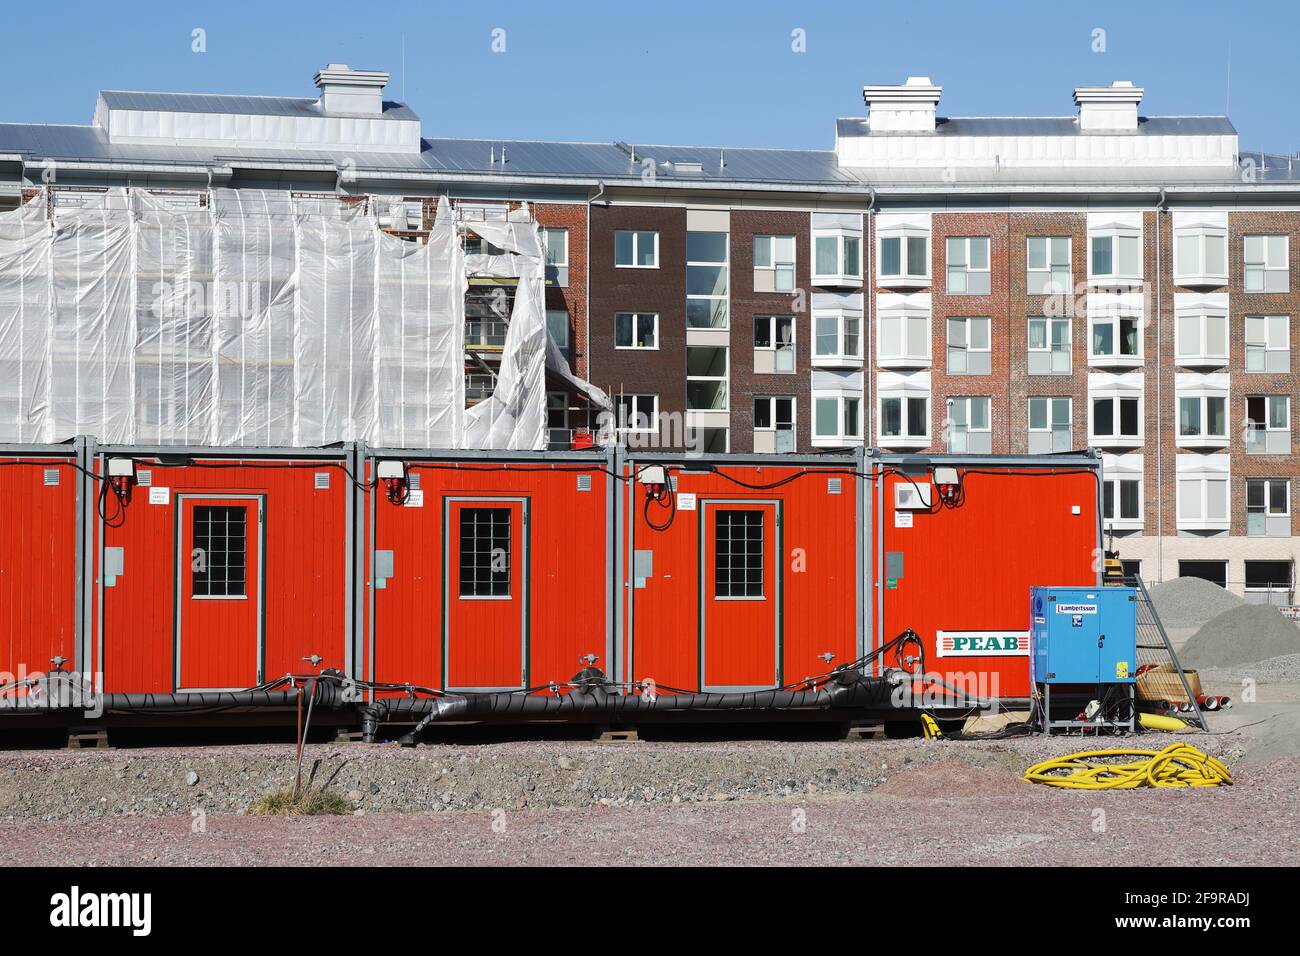 Nykoping, Sweden - April 18, 2021: The construction company Peab is building apartment buildings. Stock Photo